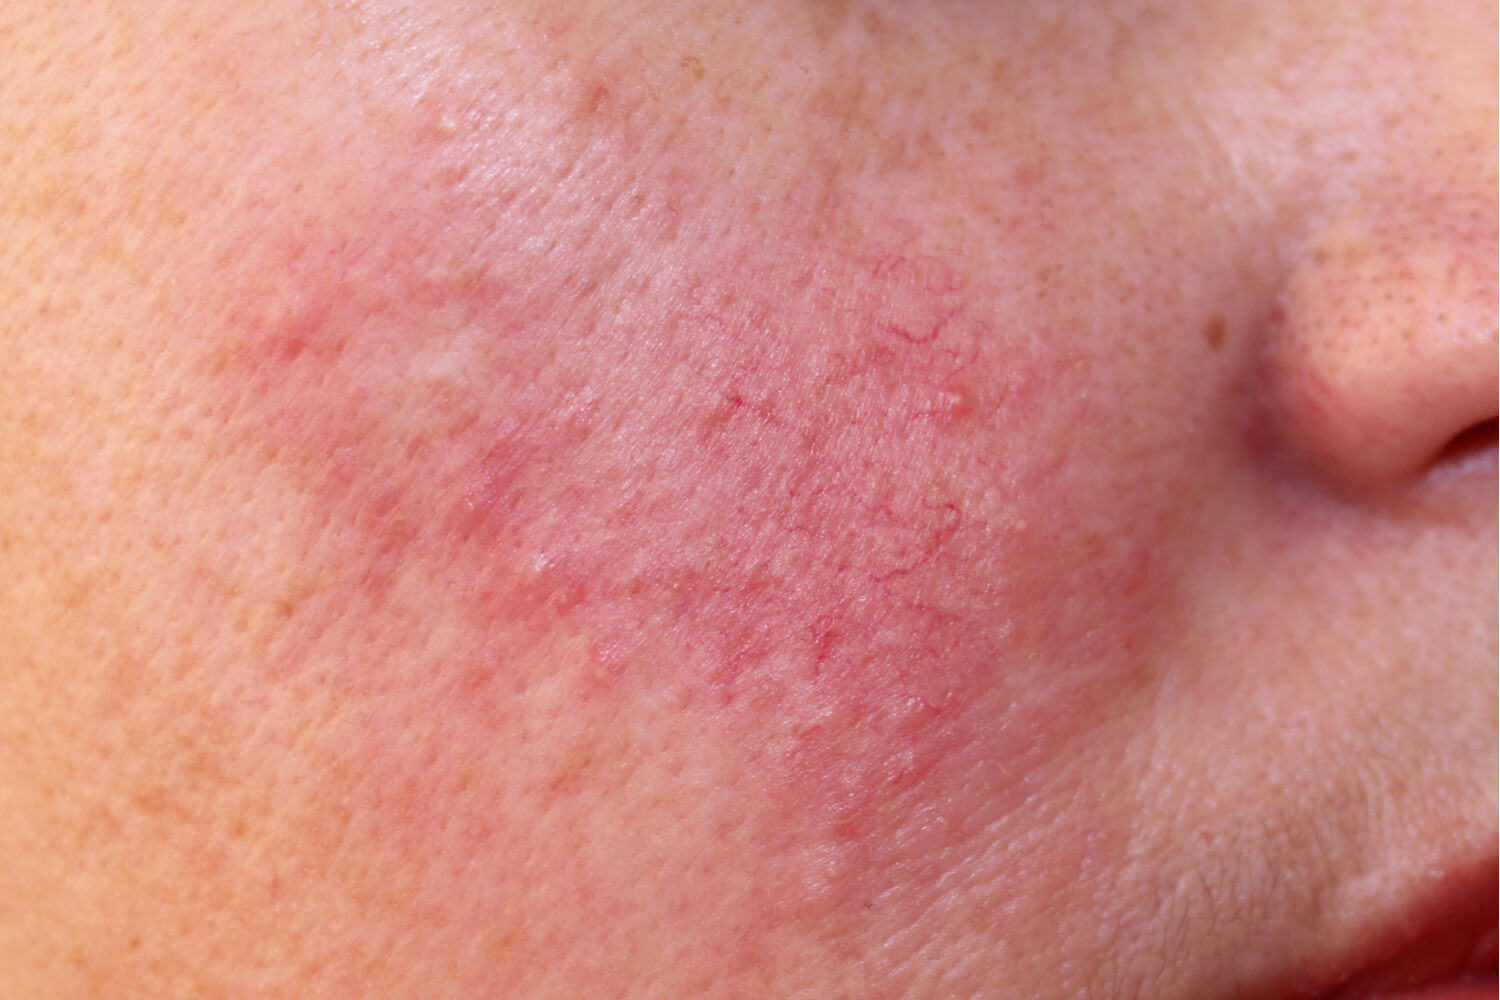 Rosacea is a non-acne causing reddness in the face